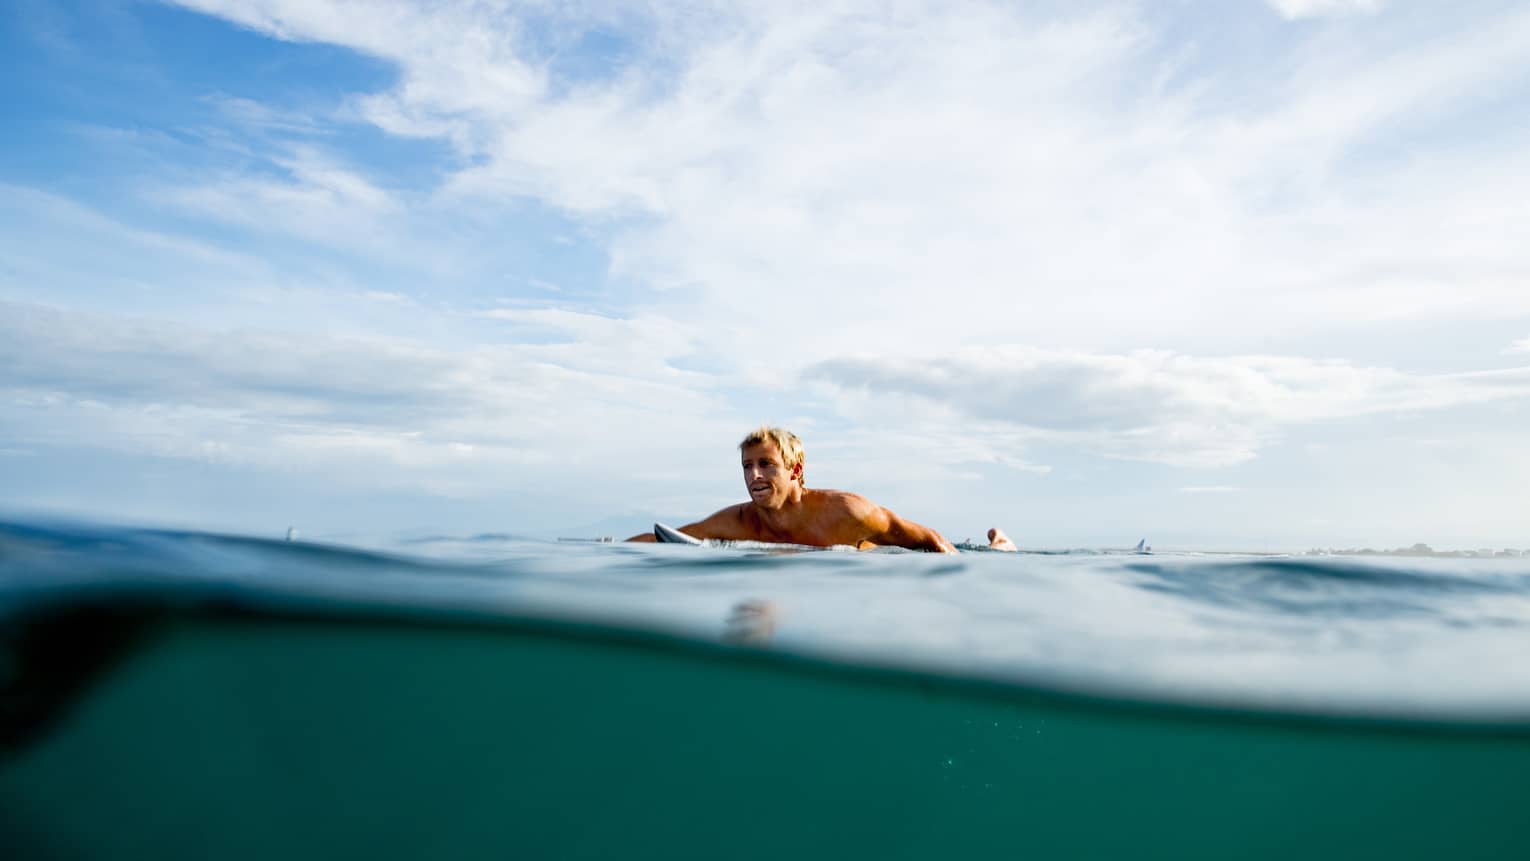 A guest swims out to surf on the water in Bali